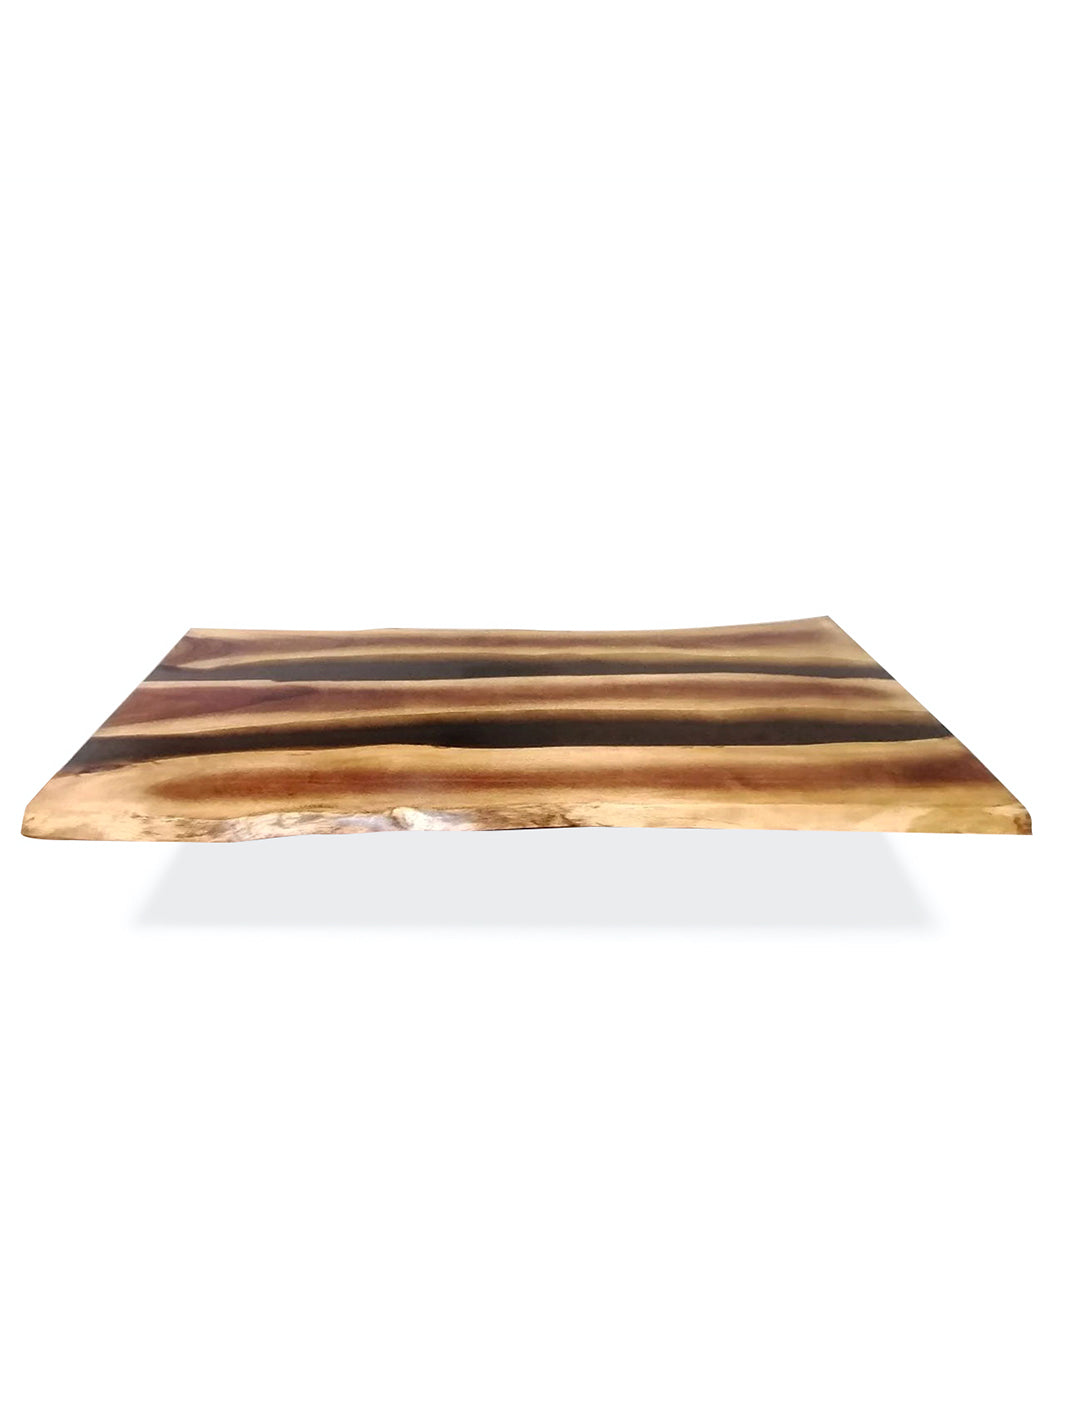 Rectangular Handcrafted Rosewood Slab Epoxy Resin Wooden Dining Table | 200x80cm Made 4 Decor Tables MDR0001